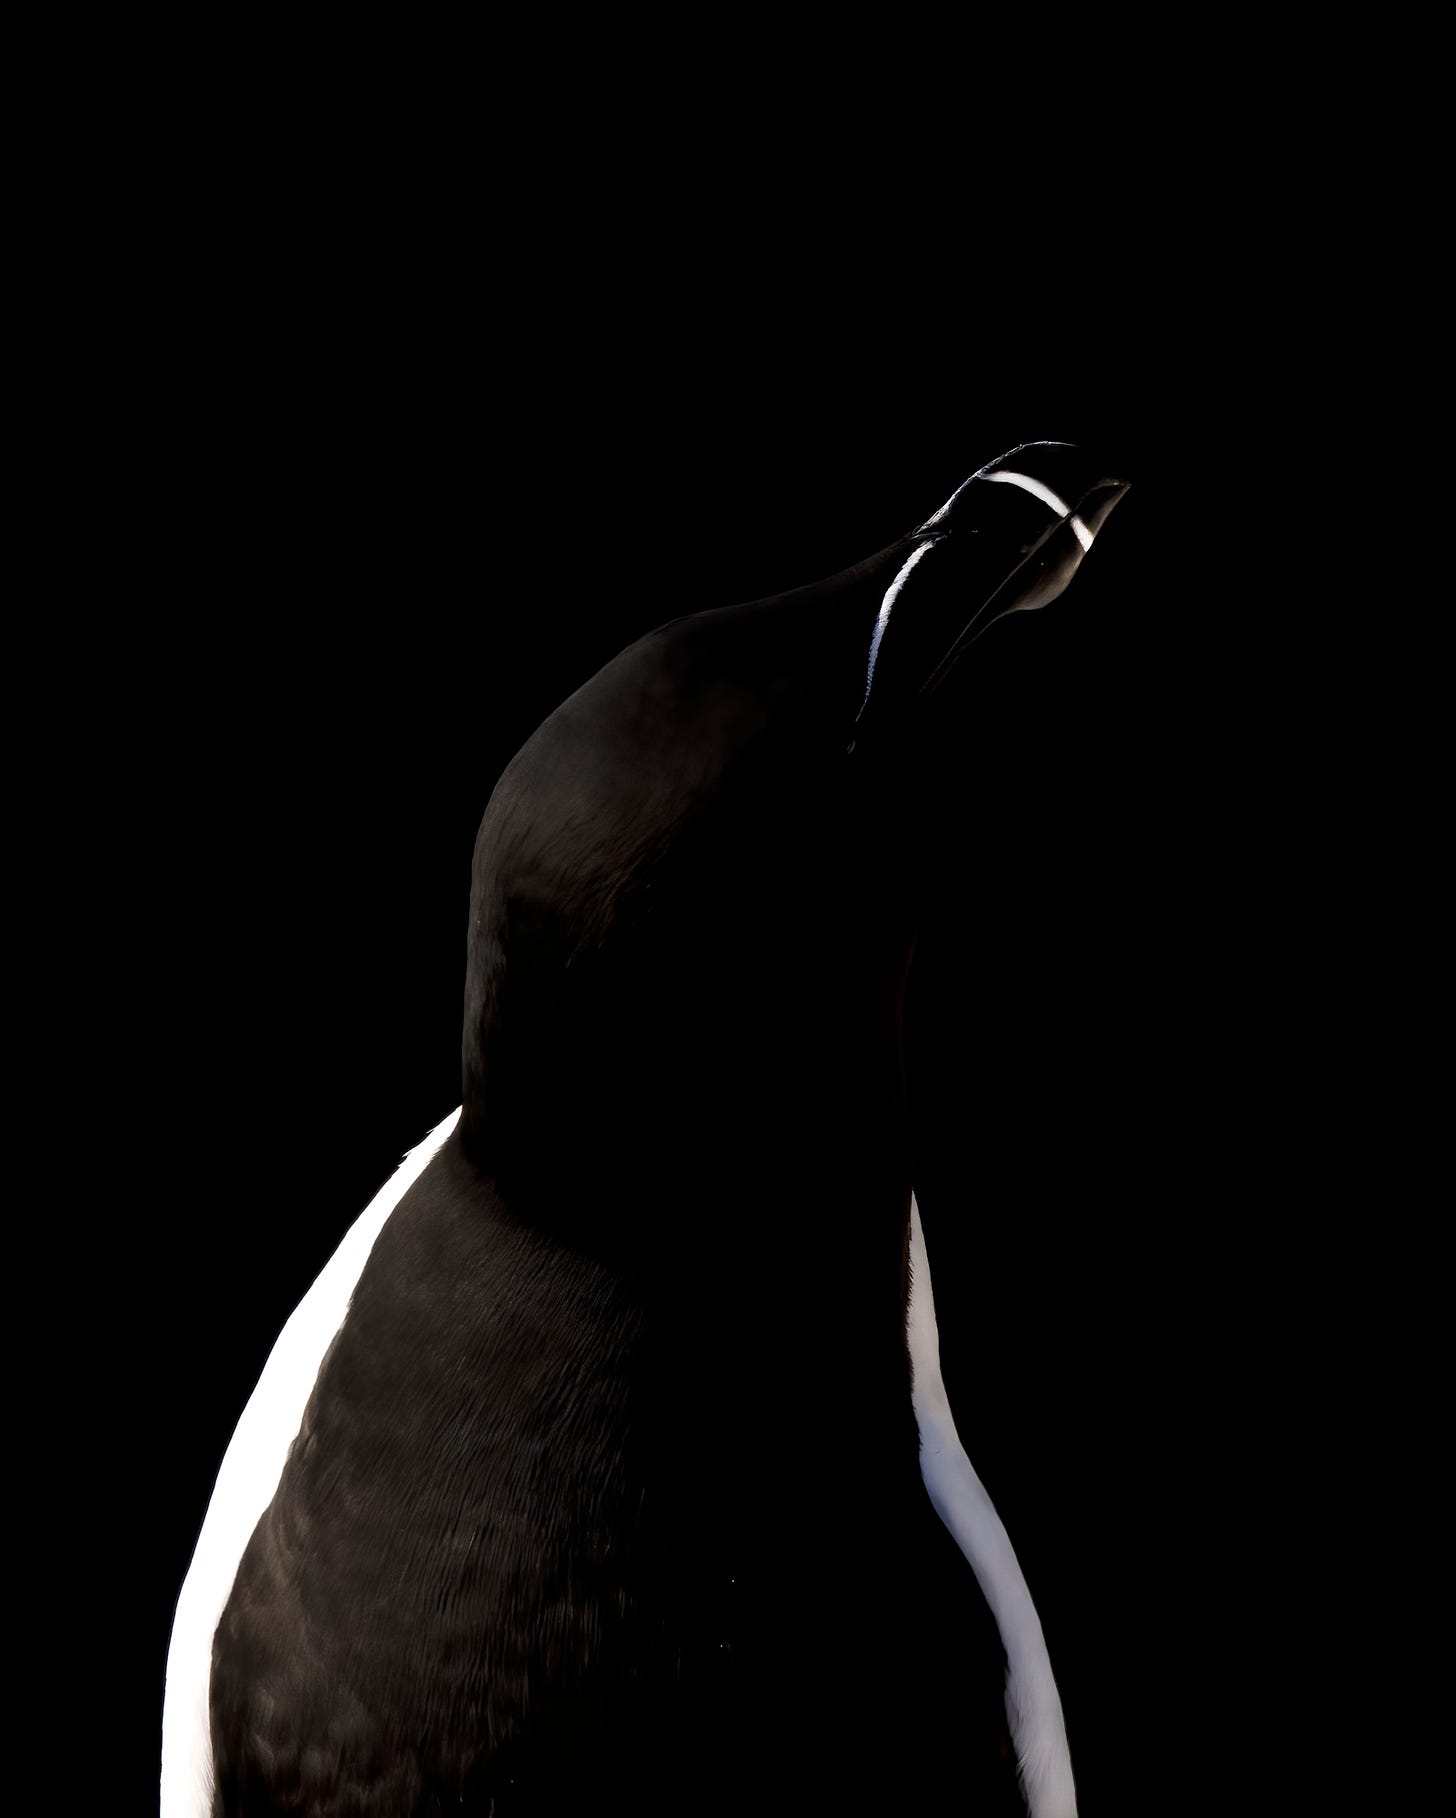 An image of a black razorbill against a black background, its beak catching the light